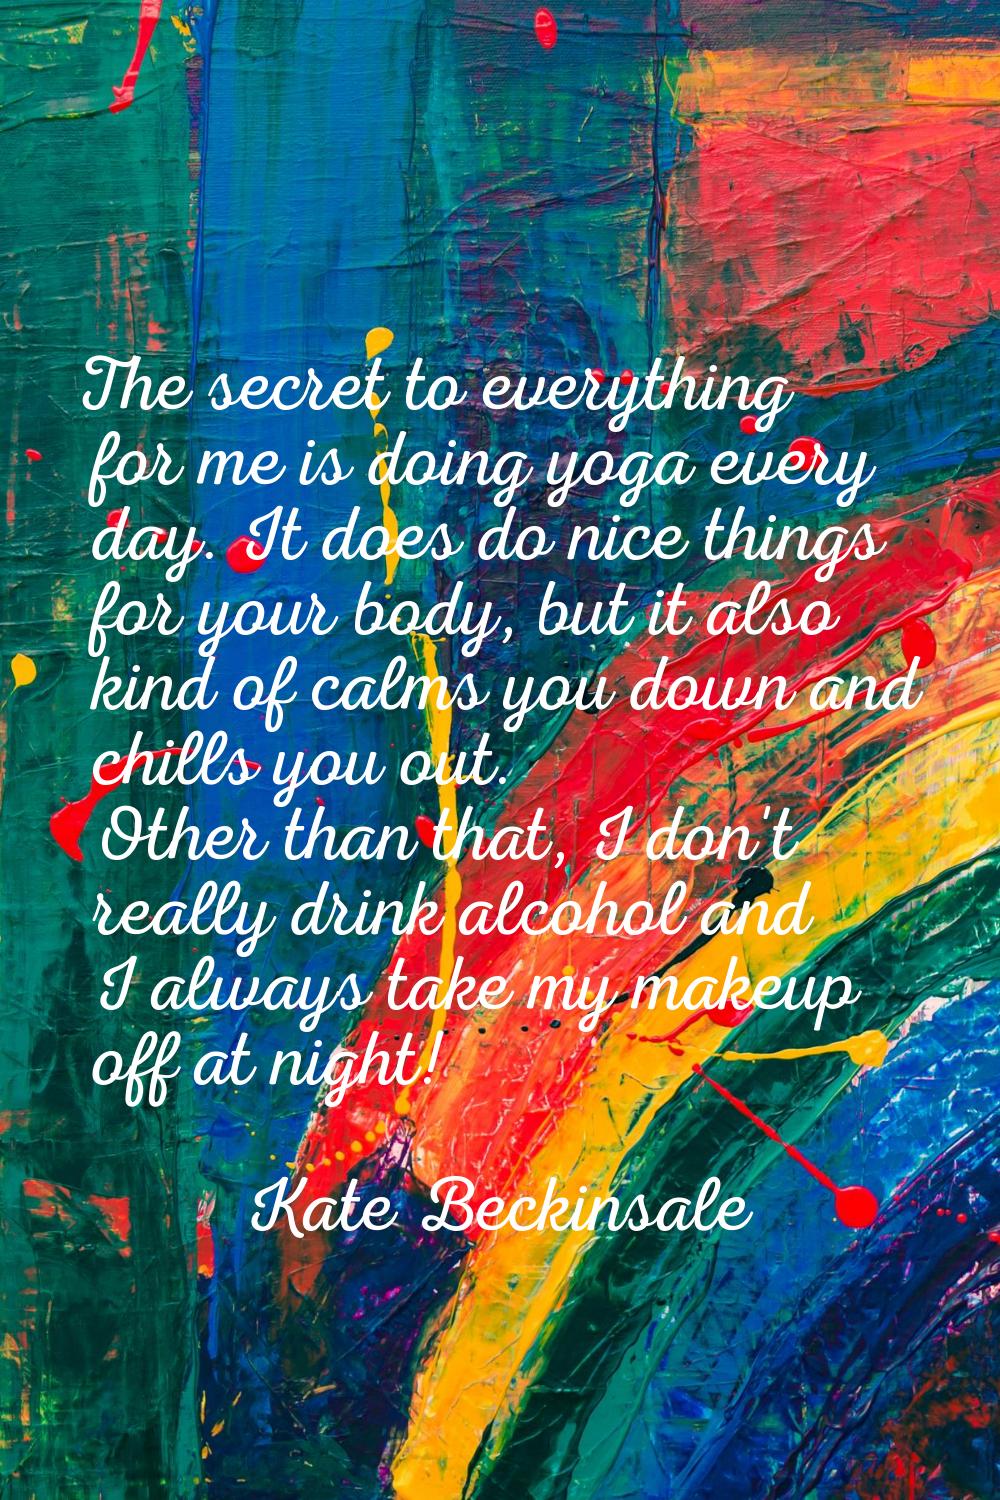 The secret to everything for me is doing yoga every day. It does do nice things for your body, but 